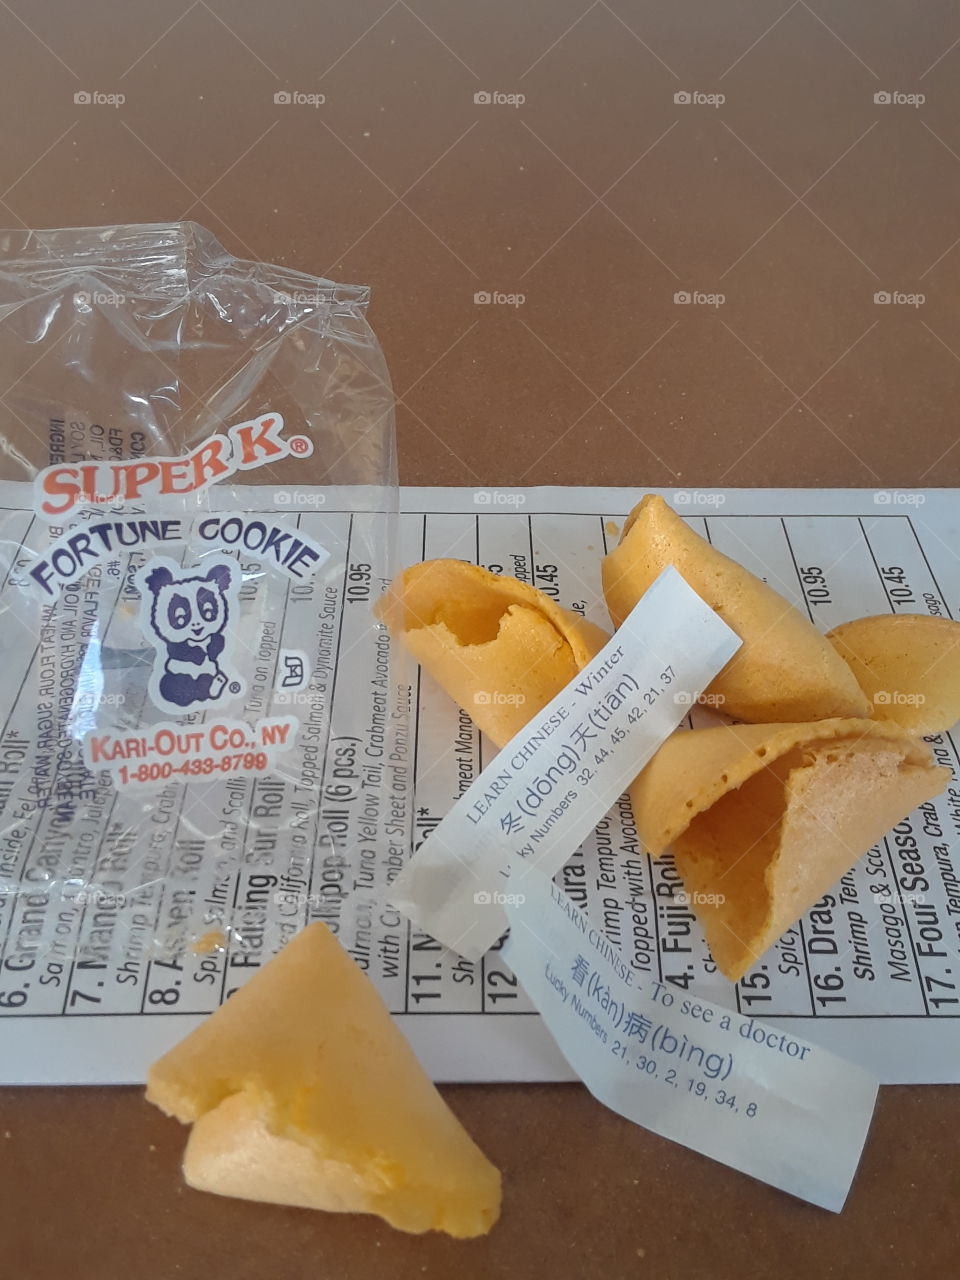 double the fortune cookie, double the fortune